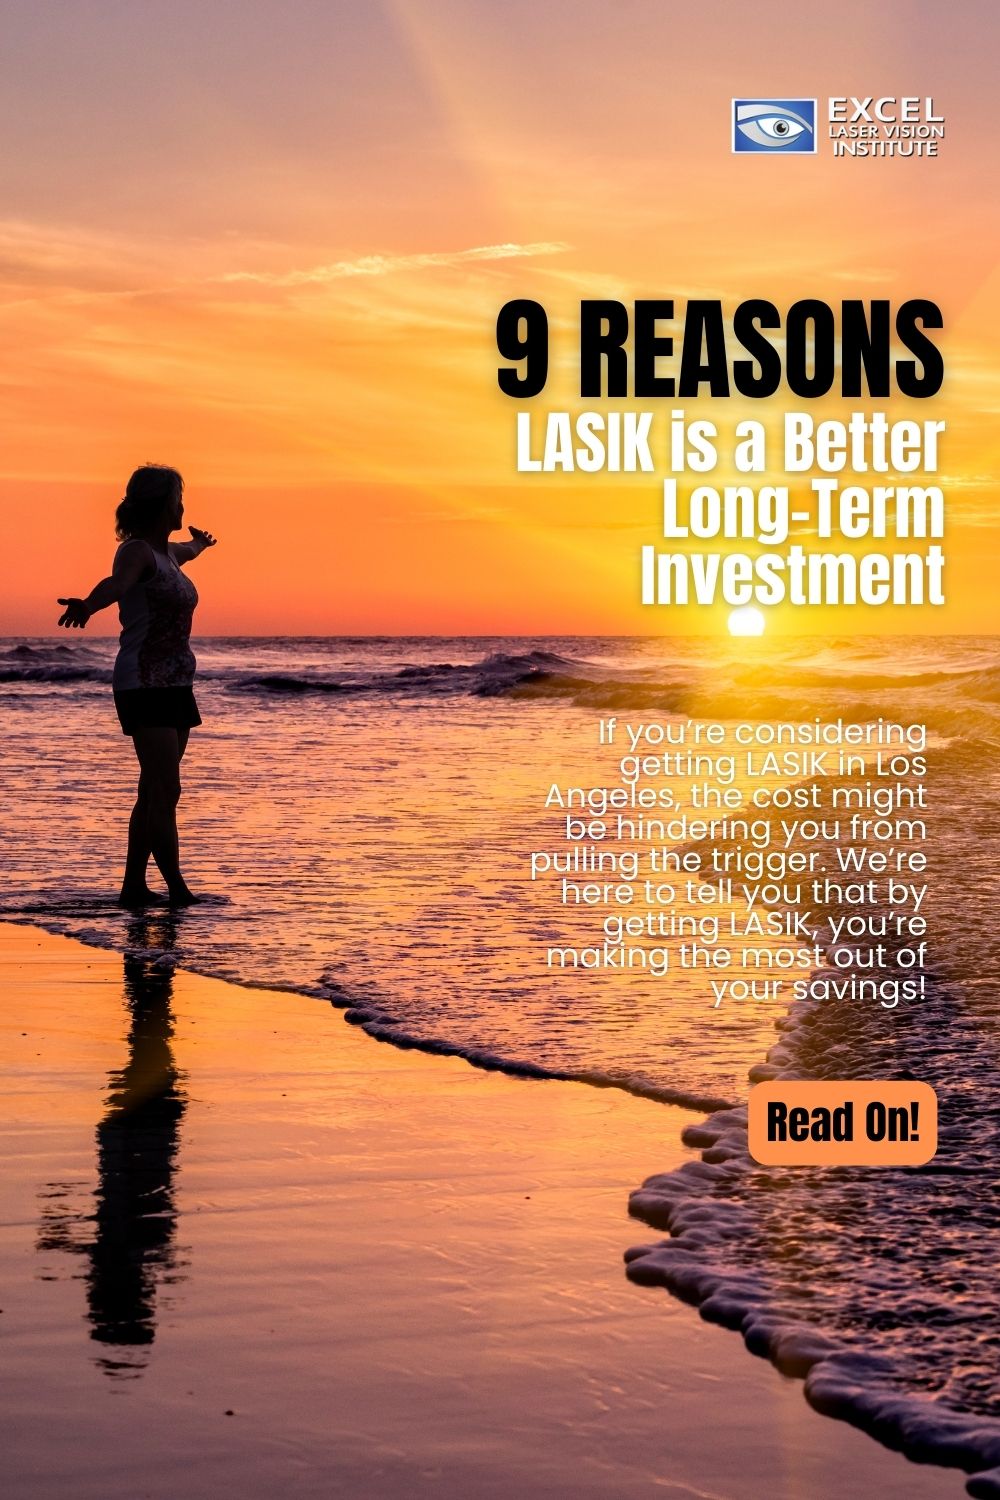 Los-Angeles-LASIK-is-a-good-investment-Pinterest-Pin-1000-×-1500